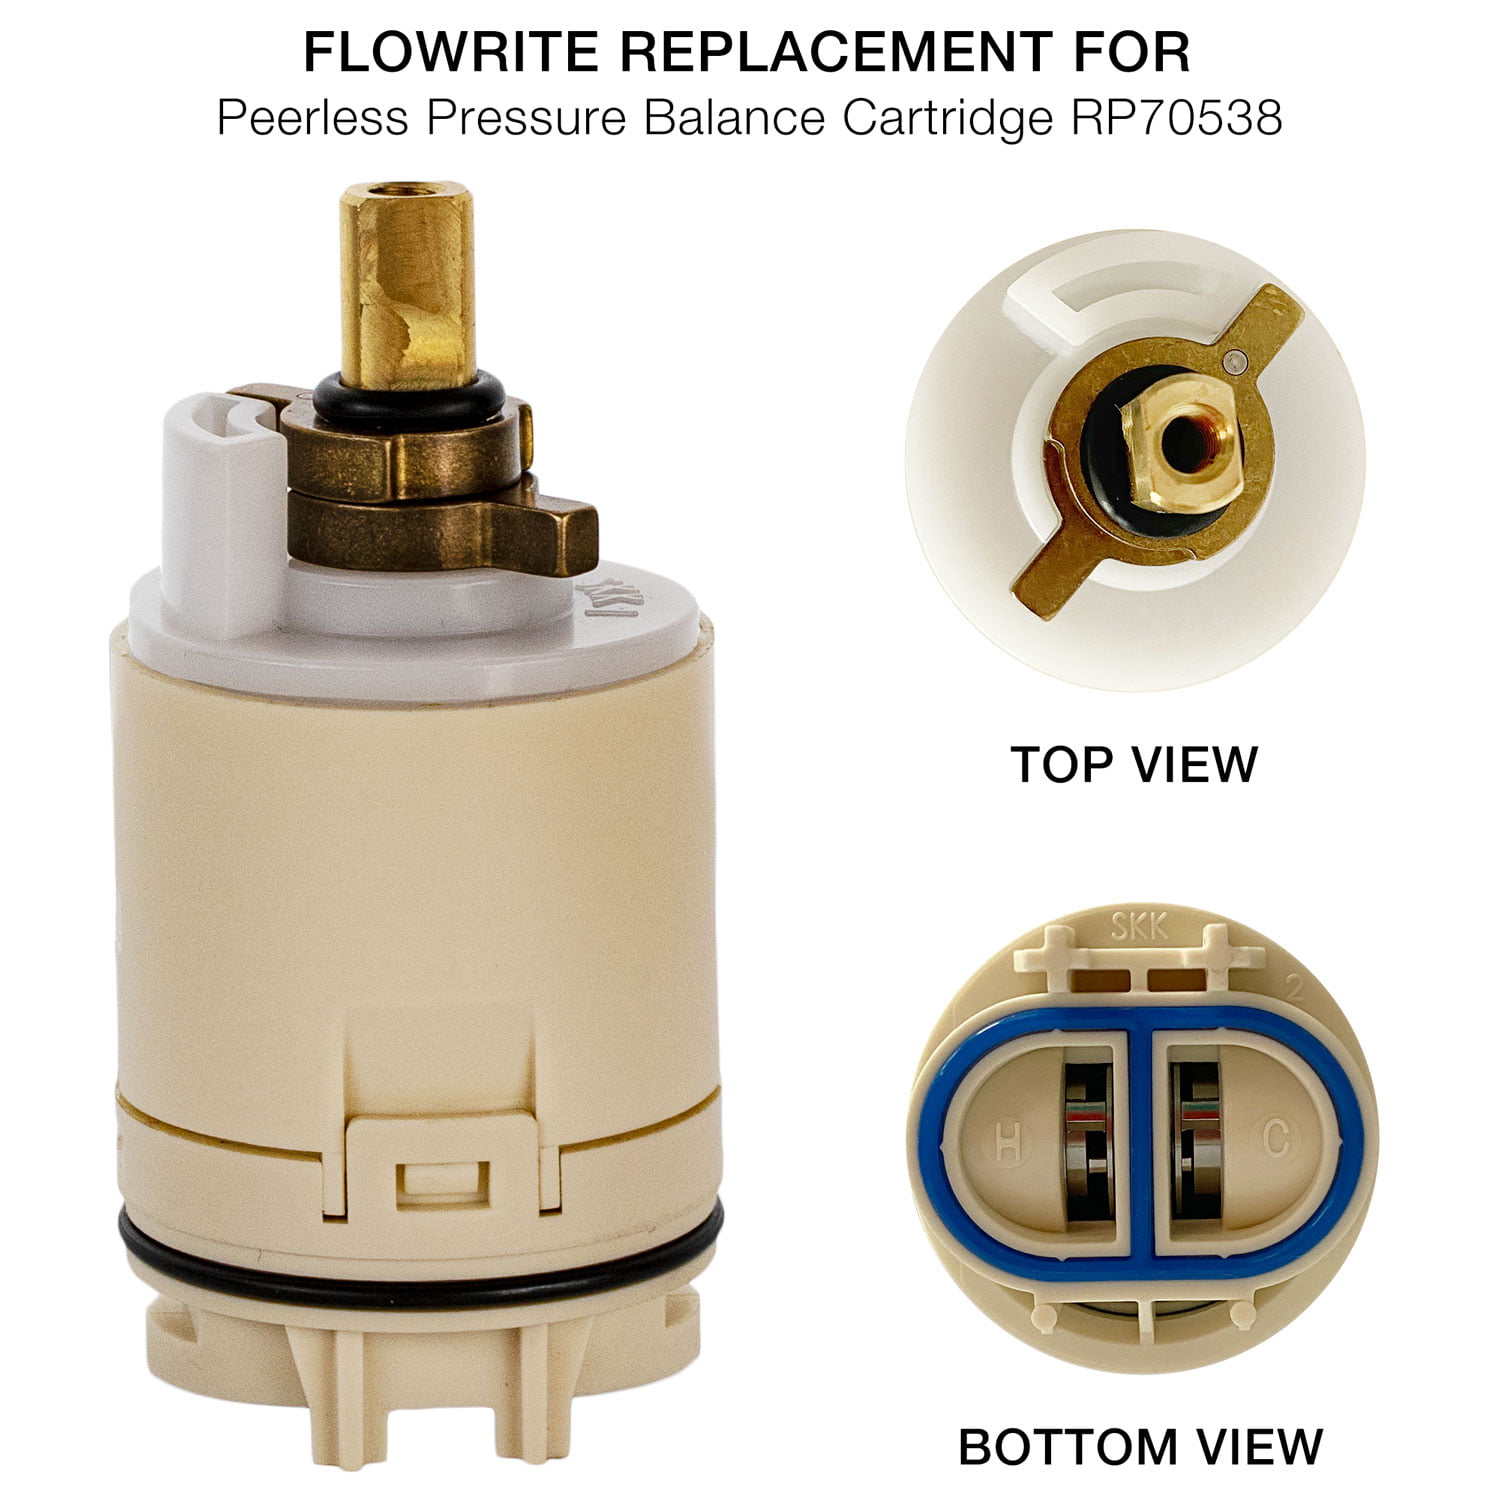 FlowRite RP70538 Replacement for Peerless Tub and Shower Pressure Balance  Cartridge